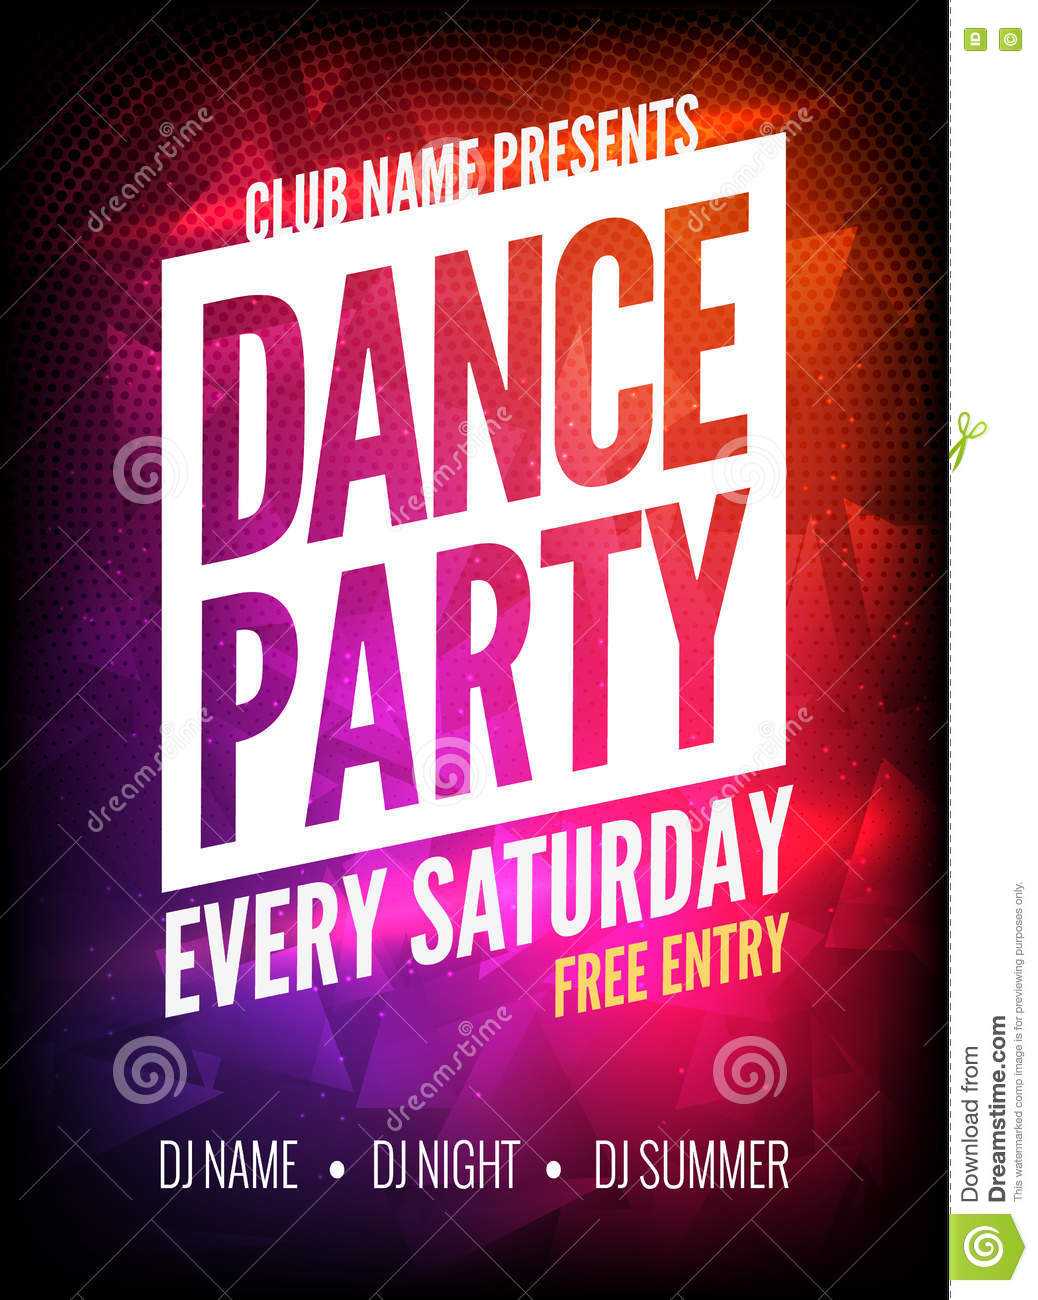 026 Night Party Flyer Free Download Template Ideas Design With Dance Flyer Template Word